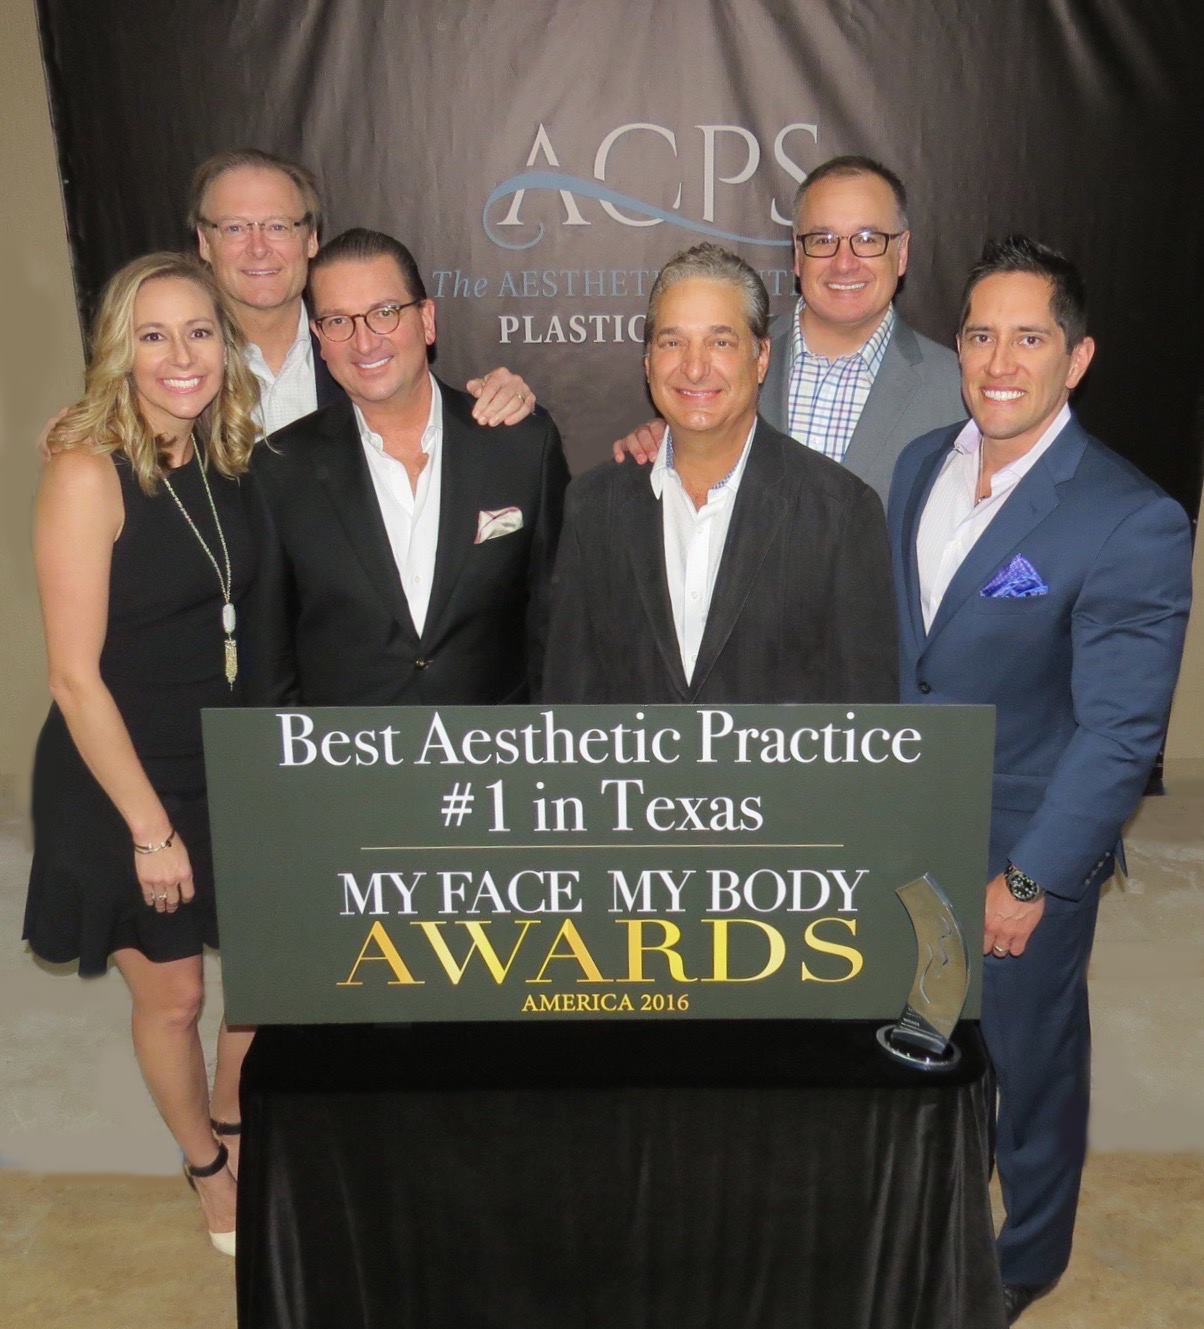 Dr. Patronella and his Group Voted Best Aesthetic Practice #1 in Texas, My Face, My Body Awards, America 2016